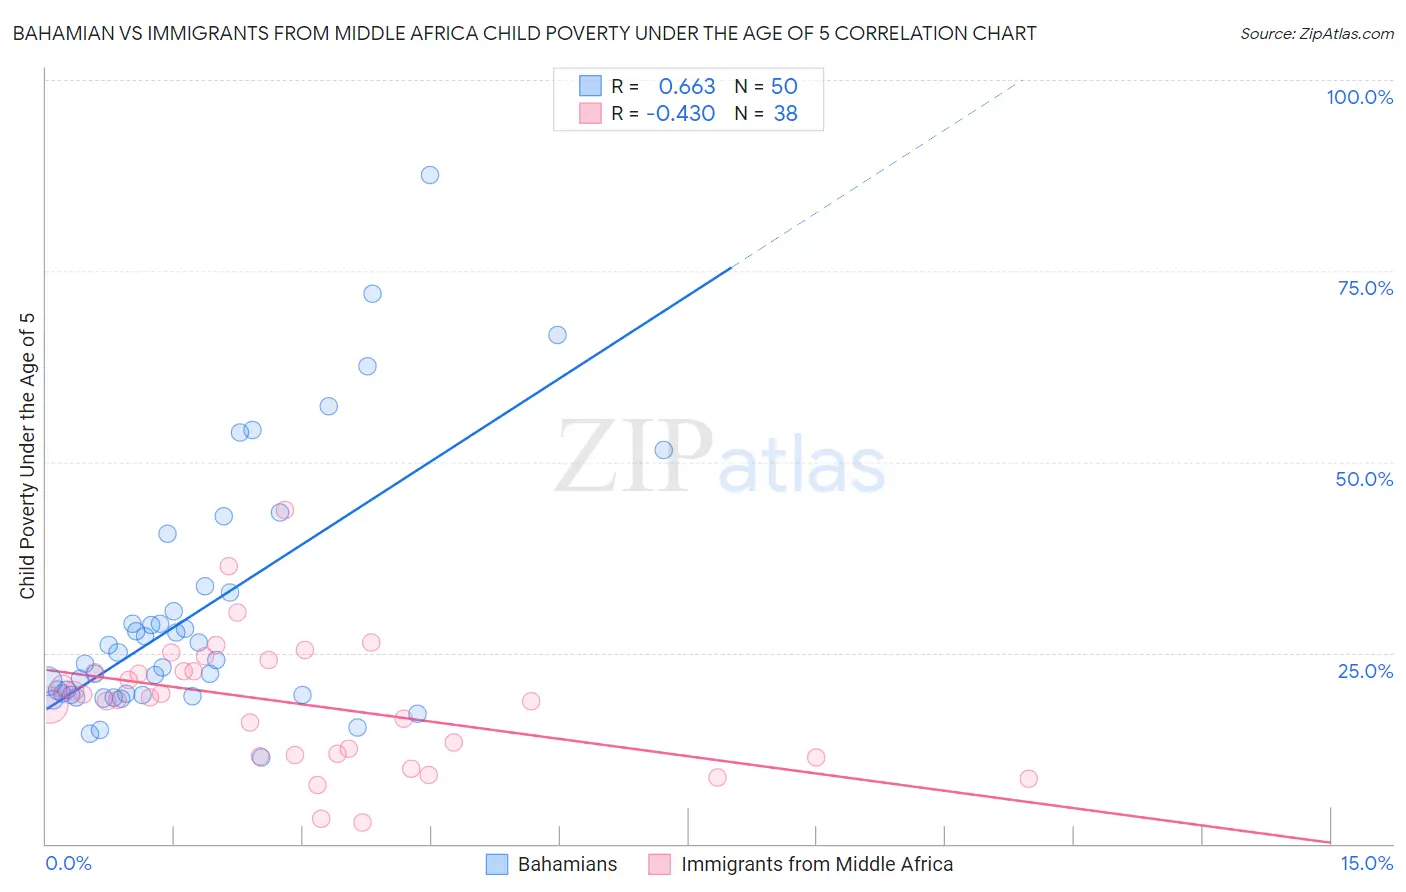 Bahamian vs Immigrants from Middle Africa Child Poverty Under the Age of 5